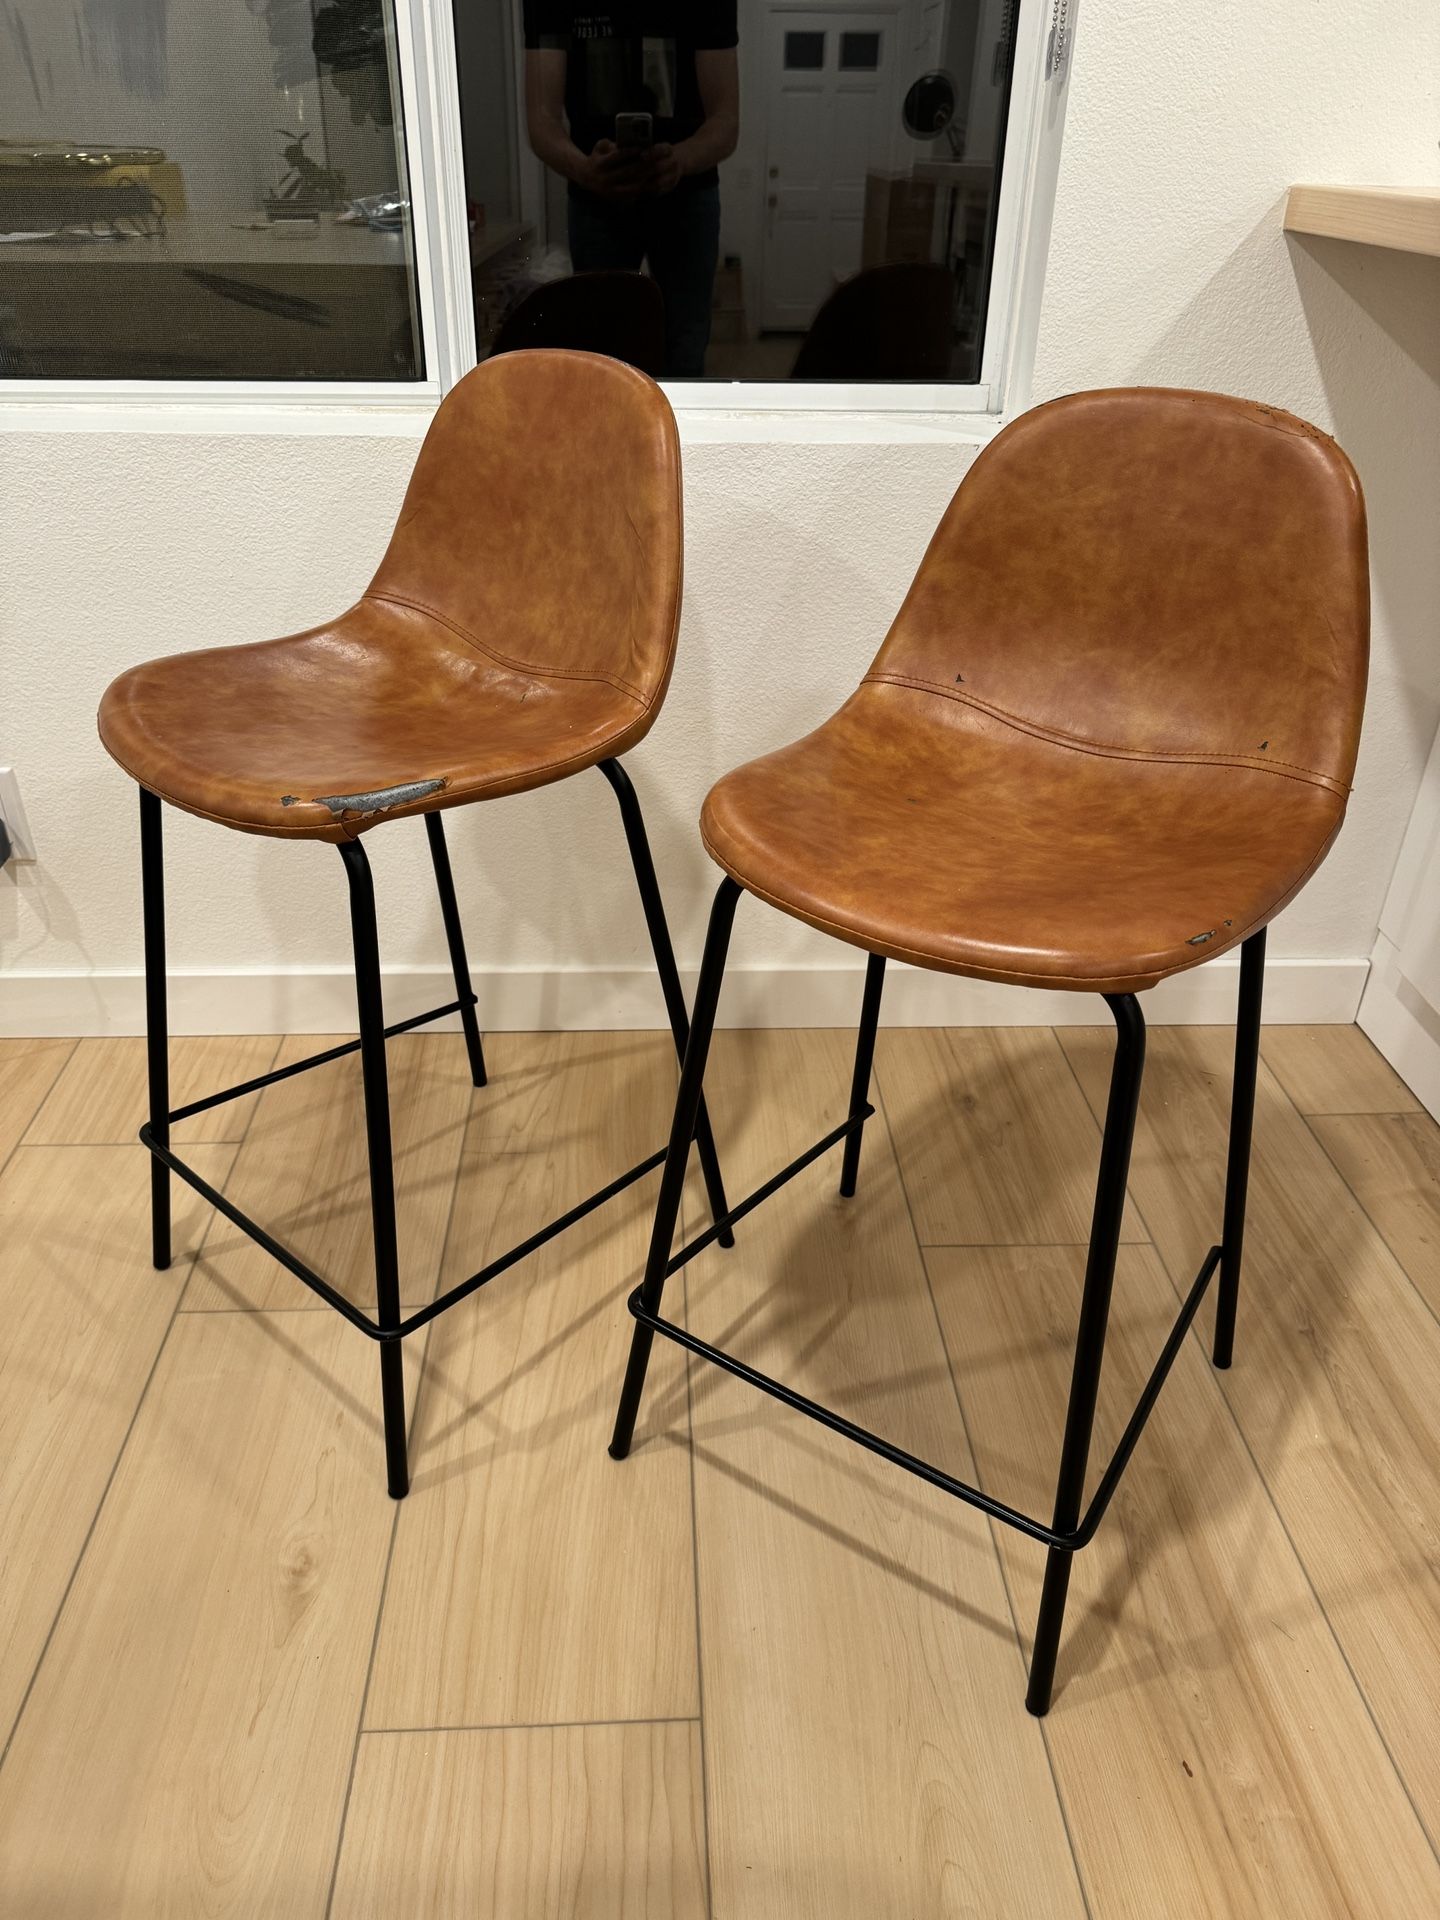 Faux Leather Modern Barstools 2x